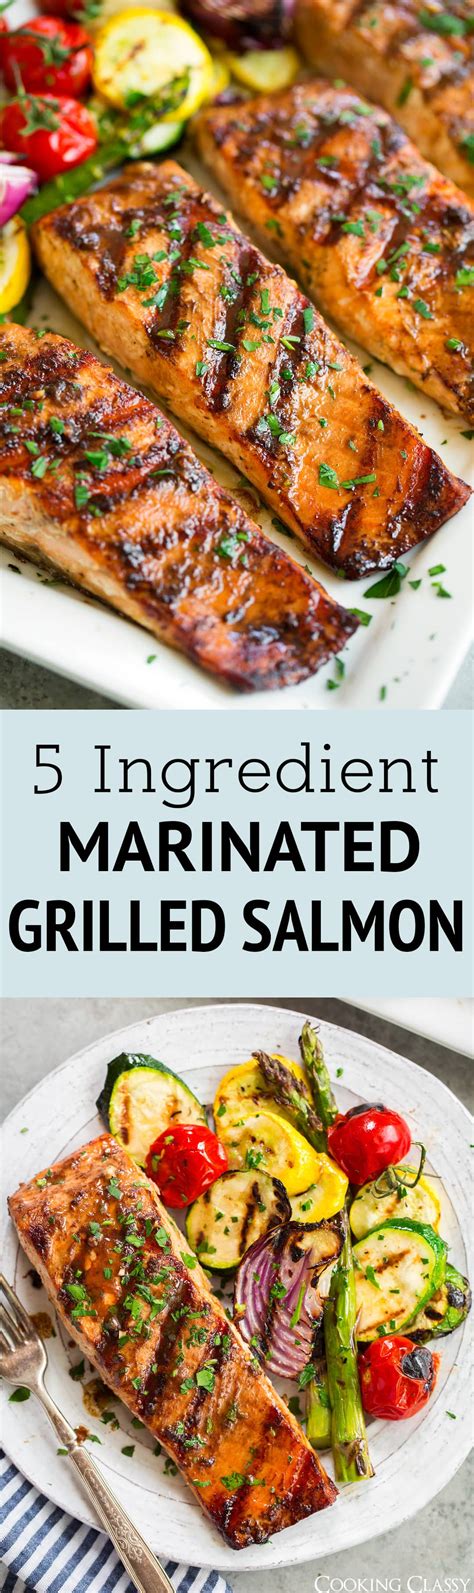 The Best Grilled Salmon Recipe 5 Ingredient Recipe Cooking Classy